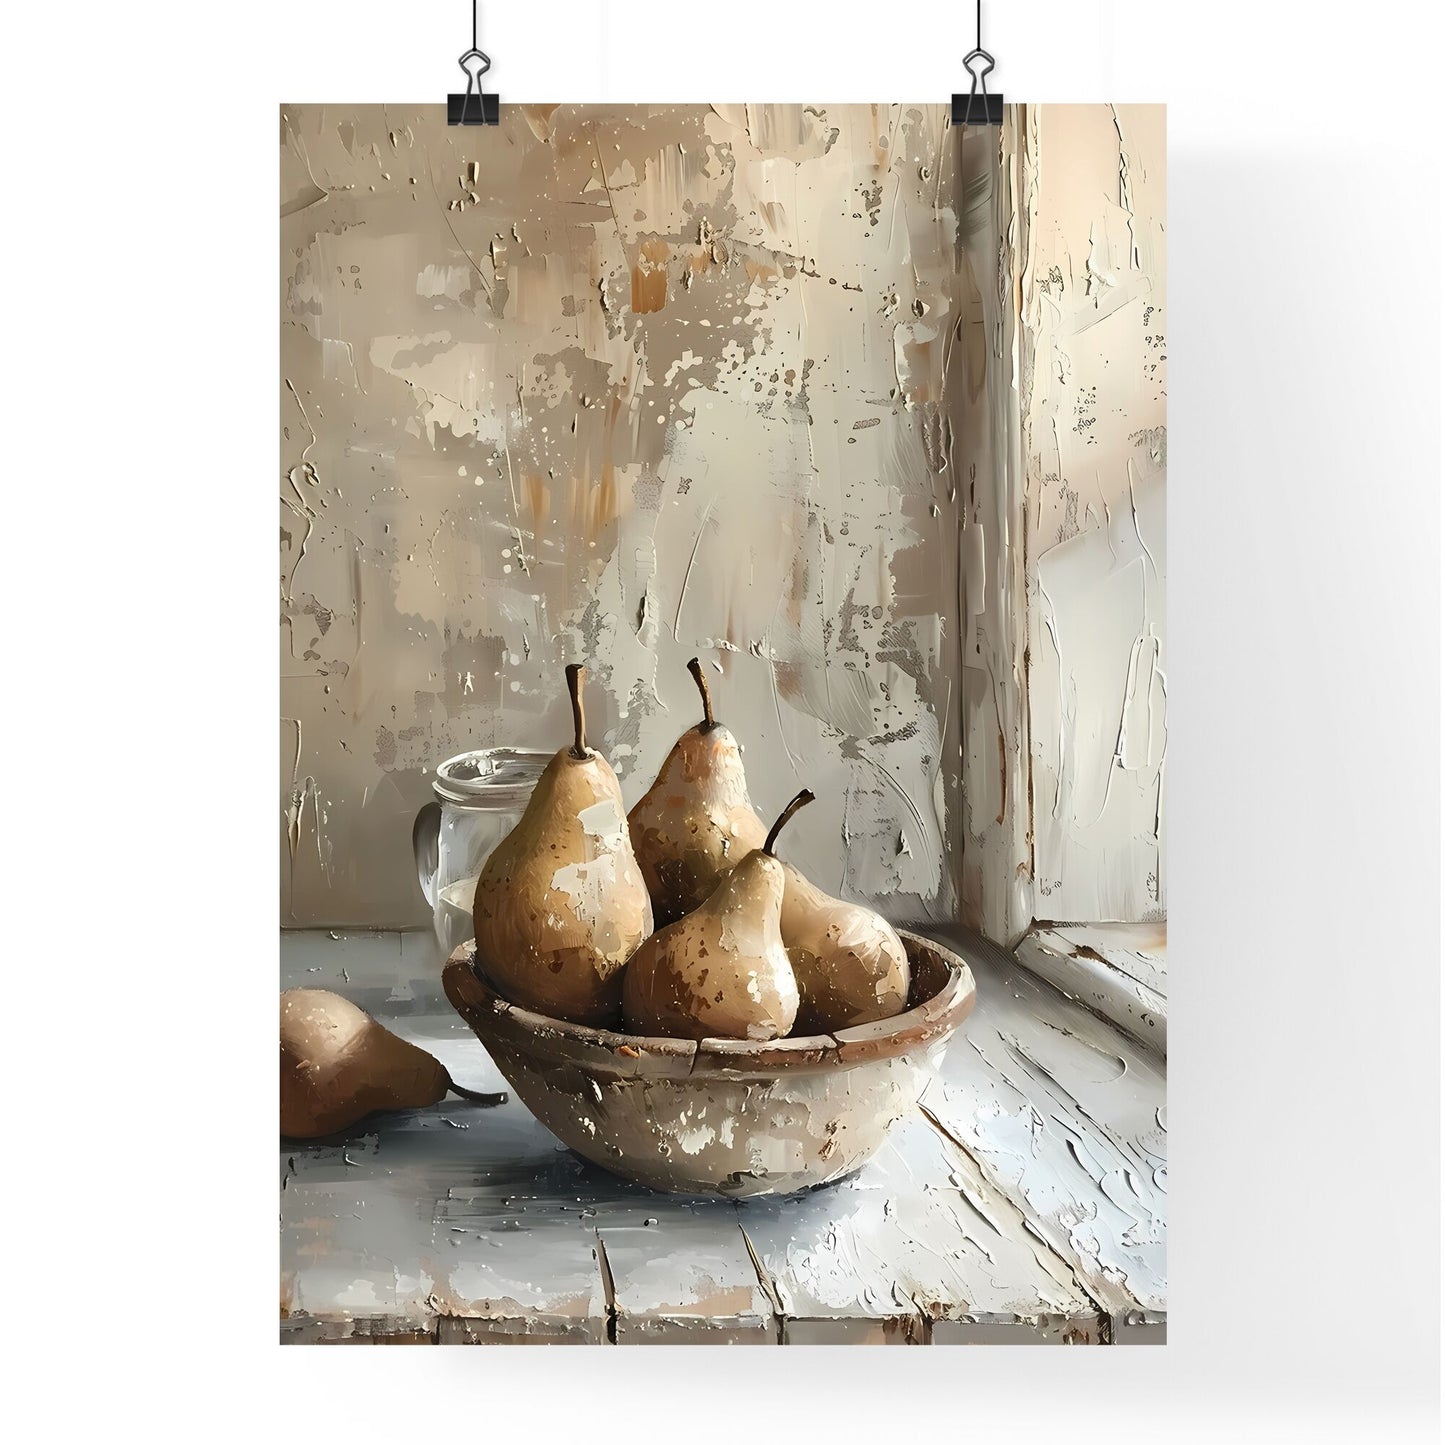 Impressionist Oil Painting, Rustic Pears in Clay Bowl, Muted Colors, Dynamic Composition, Glass of Water, White Background Default Title